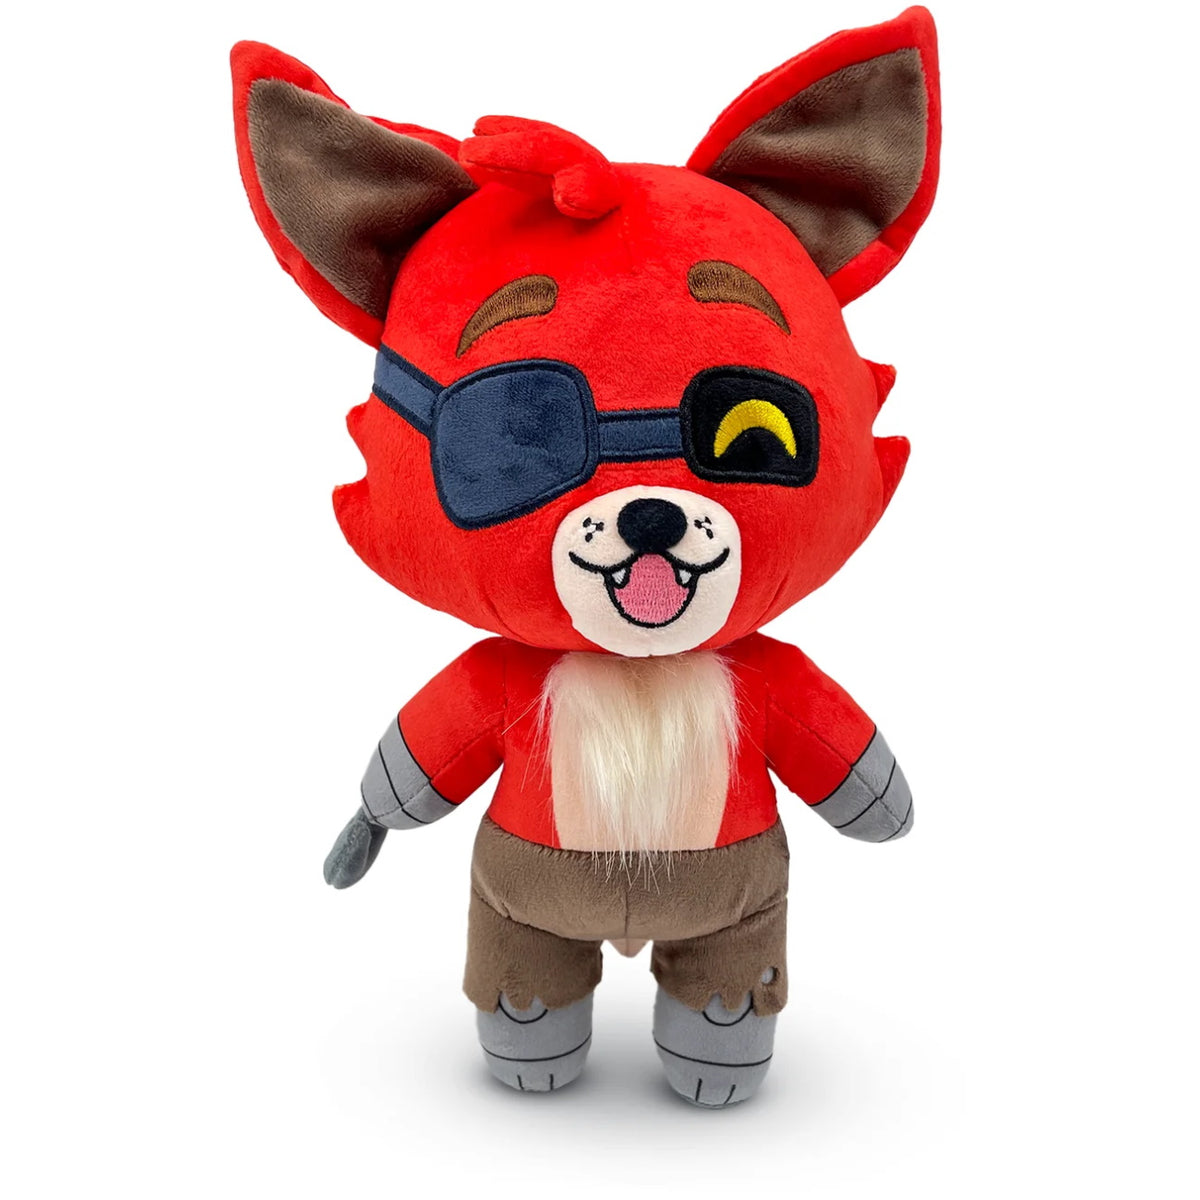 Youtooz Chibi Foxy Plush 9 inch, Collectible Plush Stuffed Animal from Five Nights at Freddy's (Exclusive) by The Youtooz Fnaf Collection